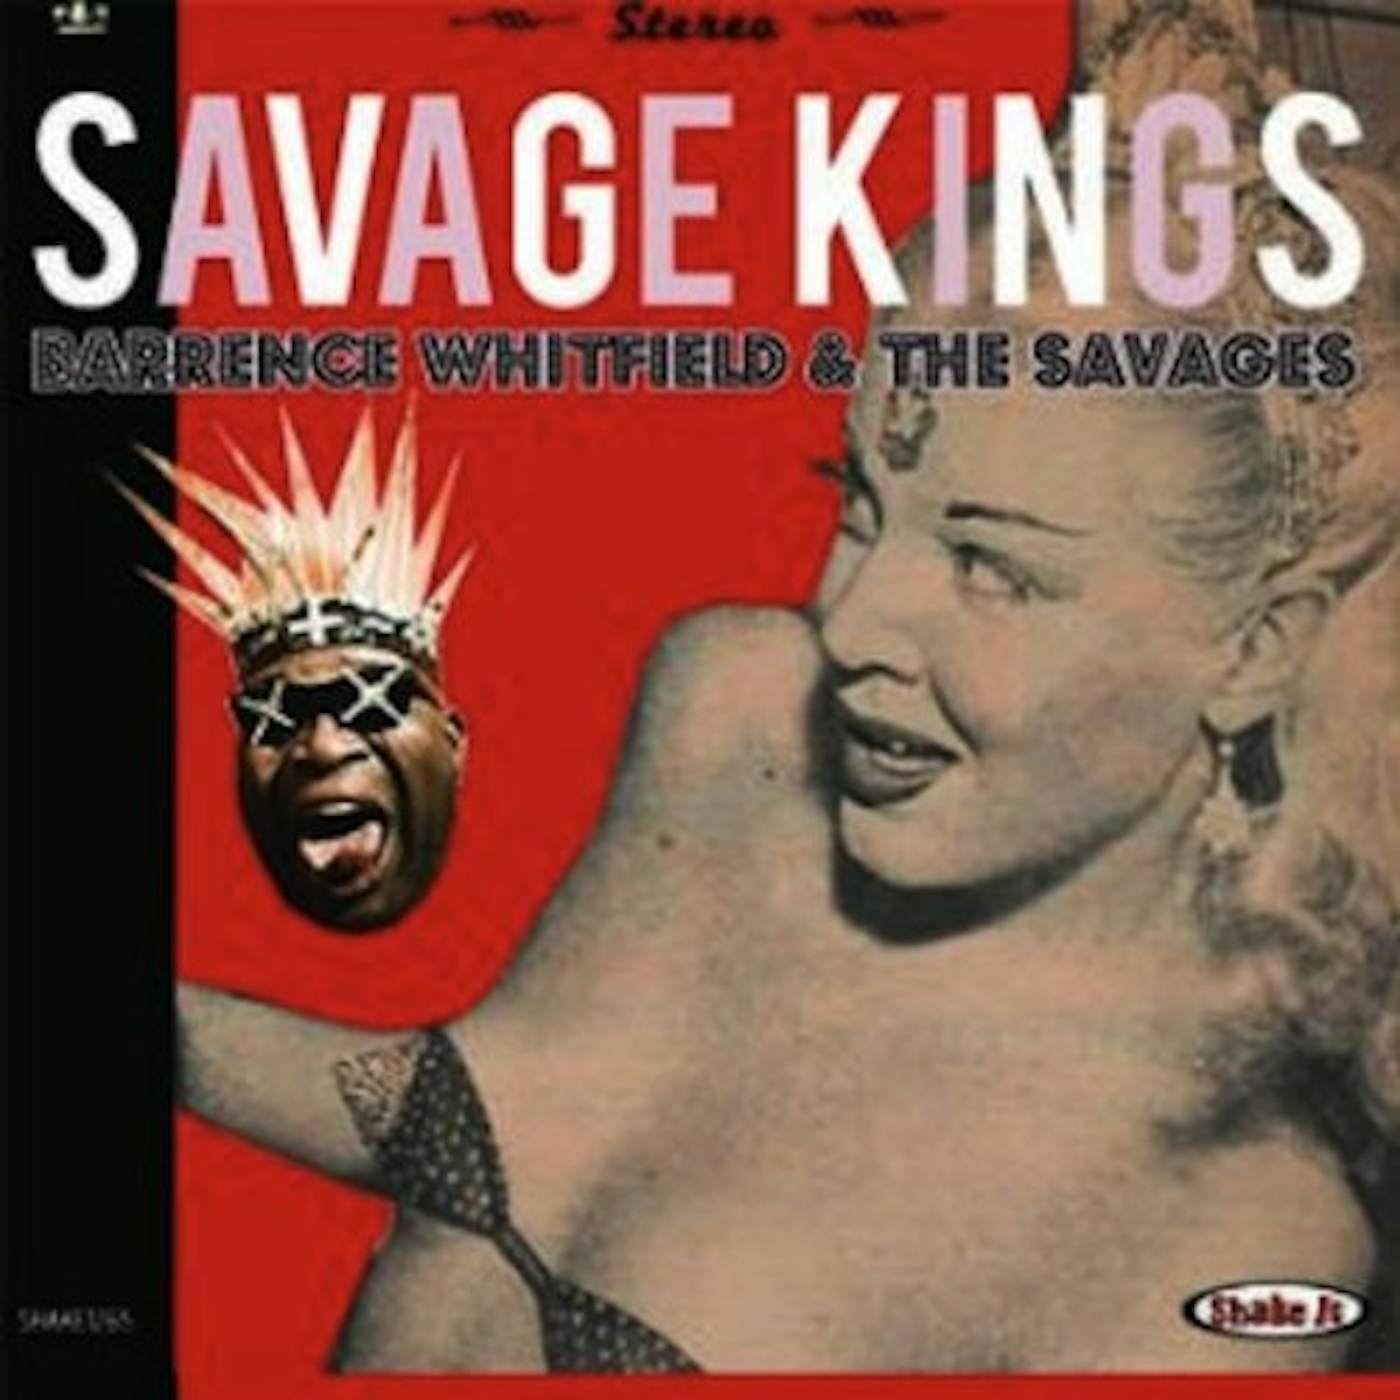 Barrence Whitfield & The Savages Savage Kings Vinyl Record